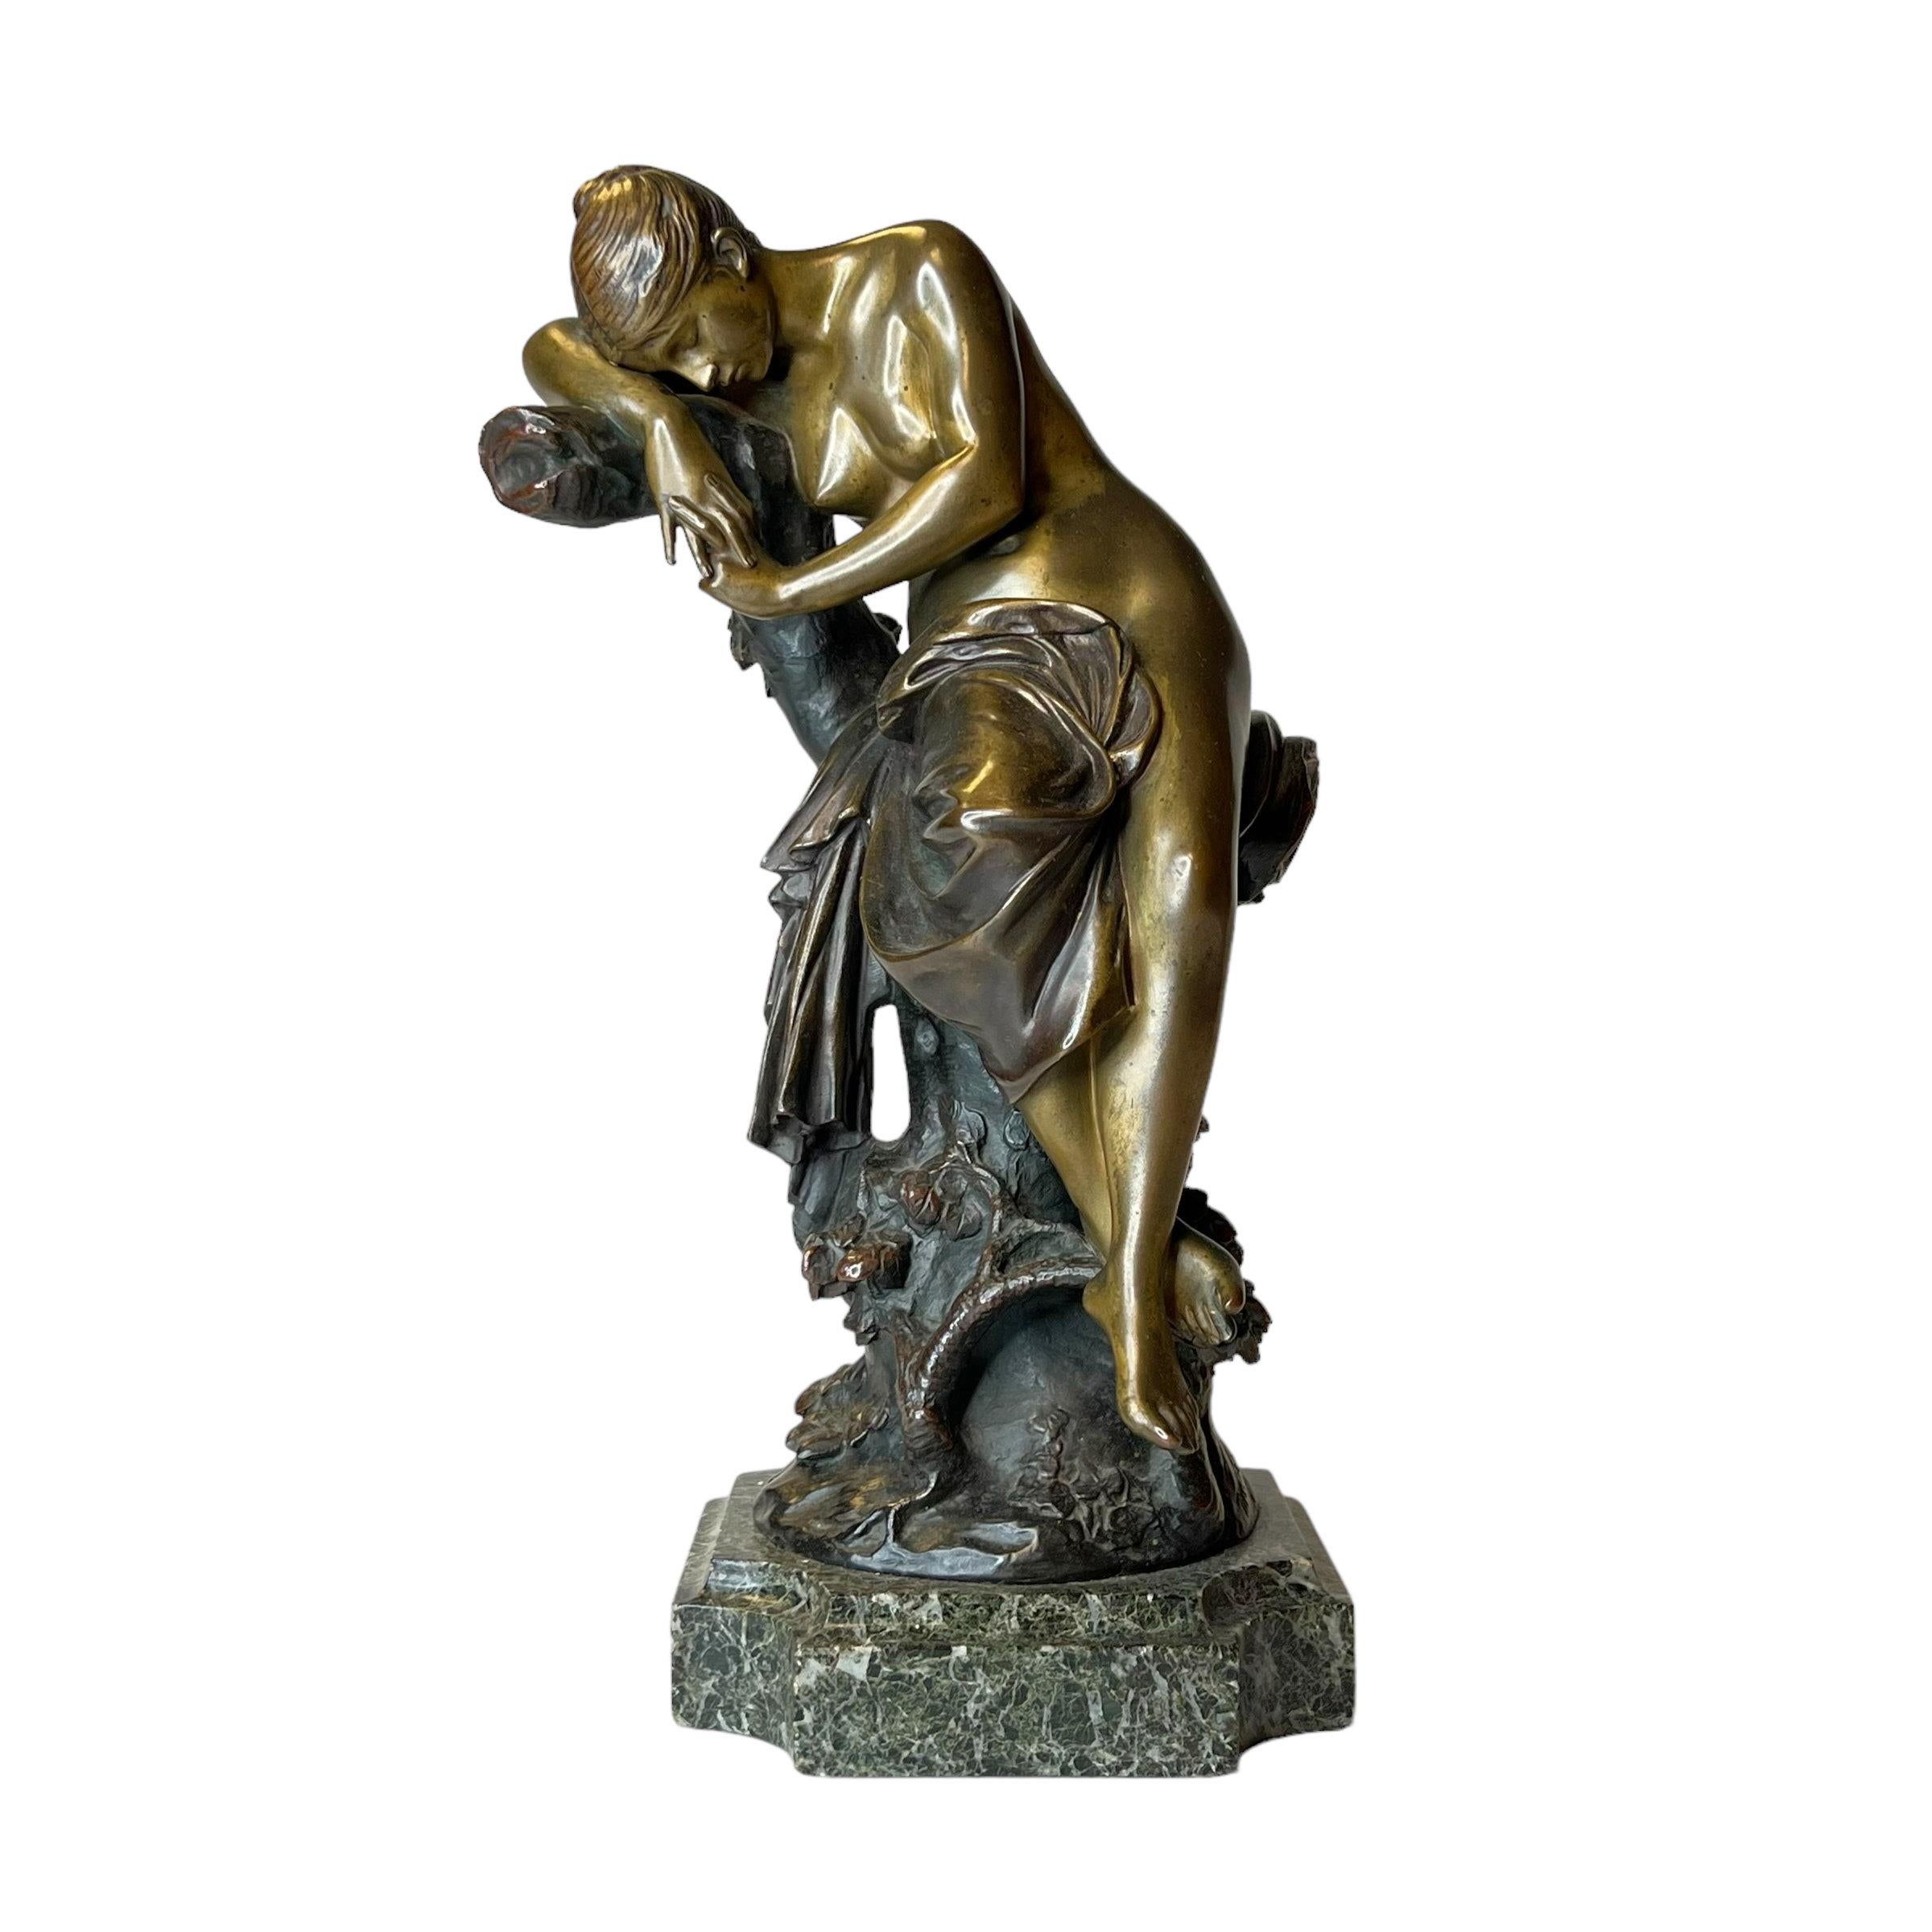 20th Century Bronze Sculpture of Sleeping Maiden by Luca Madrassi (1848-1918) For Sale